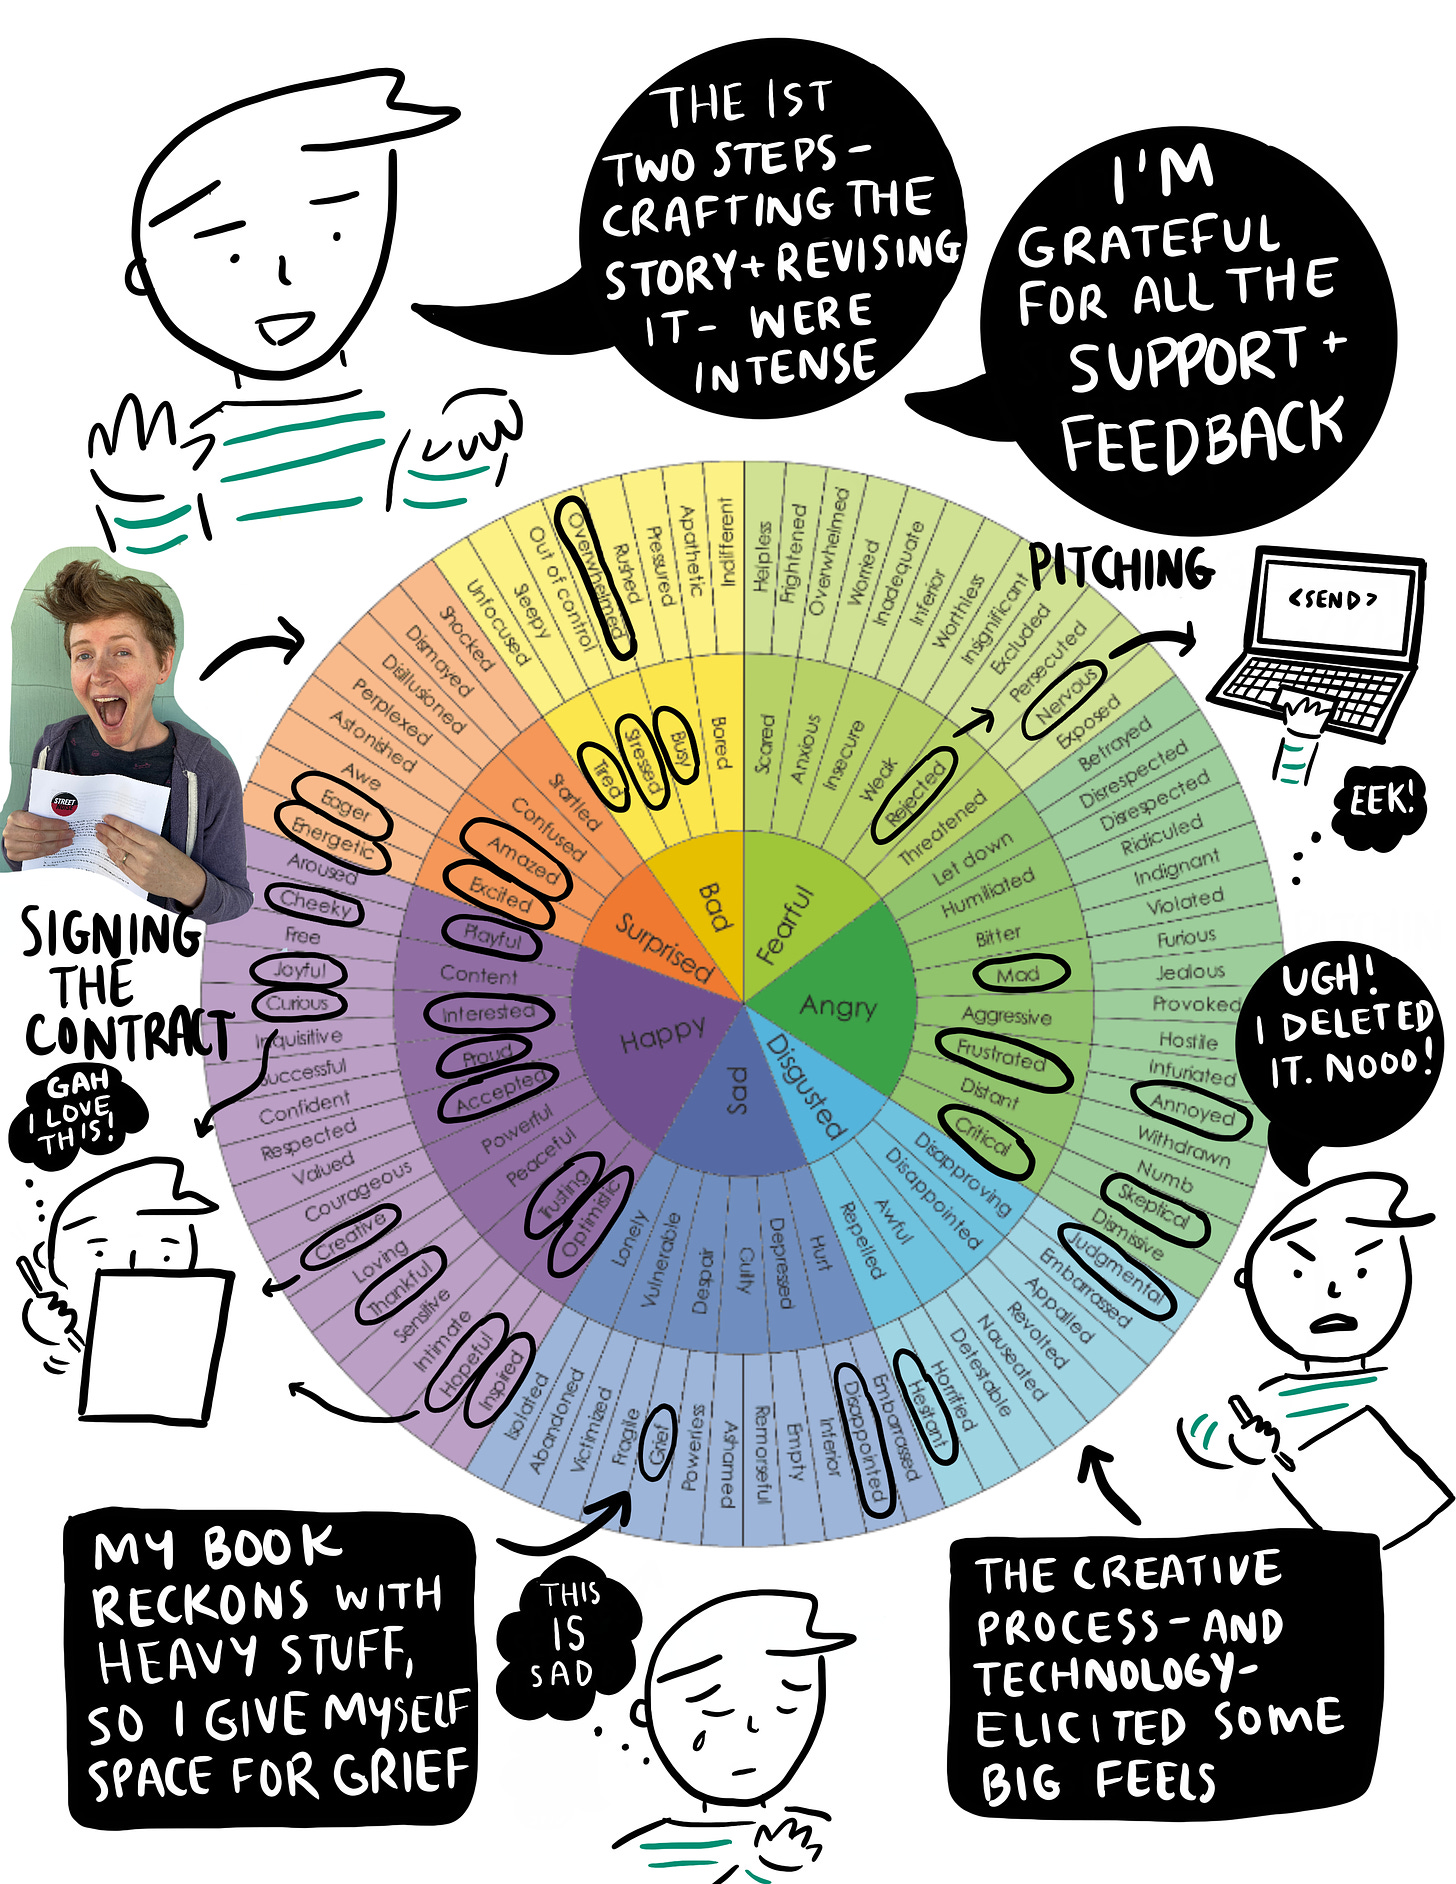 The feelings wheel with small illustrations explaining the various feelings that arose thru this process